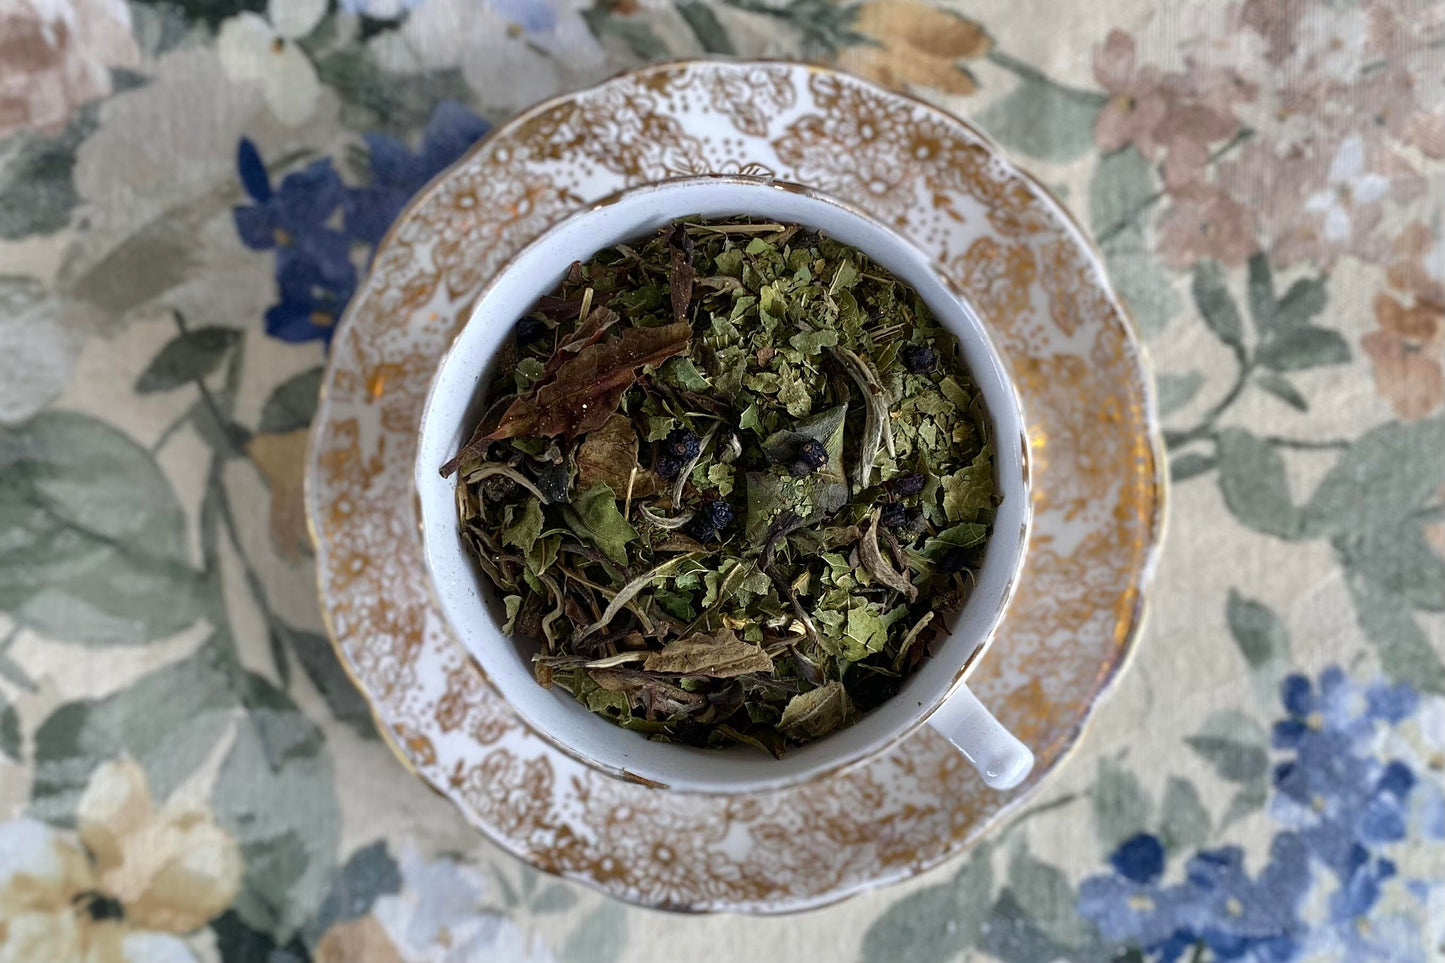 teacup full of gold glittery white tea with mulberry leaf